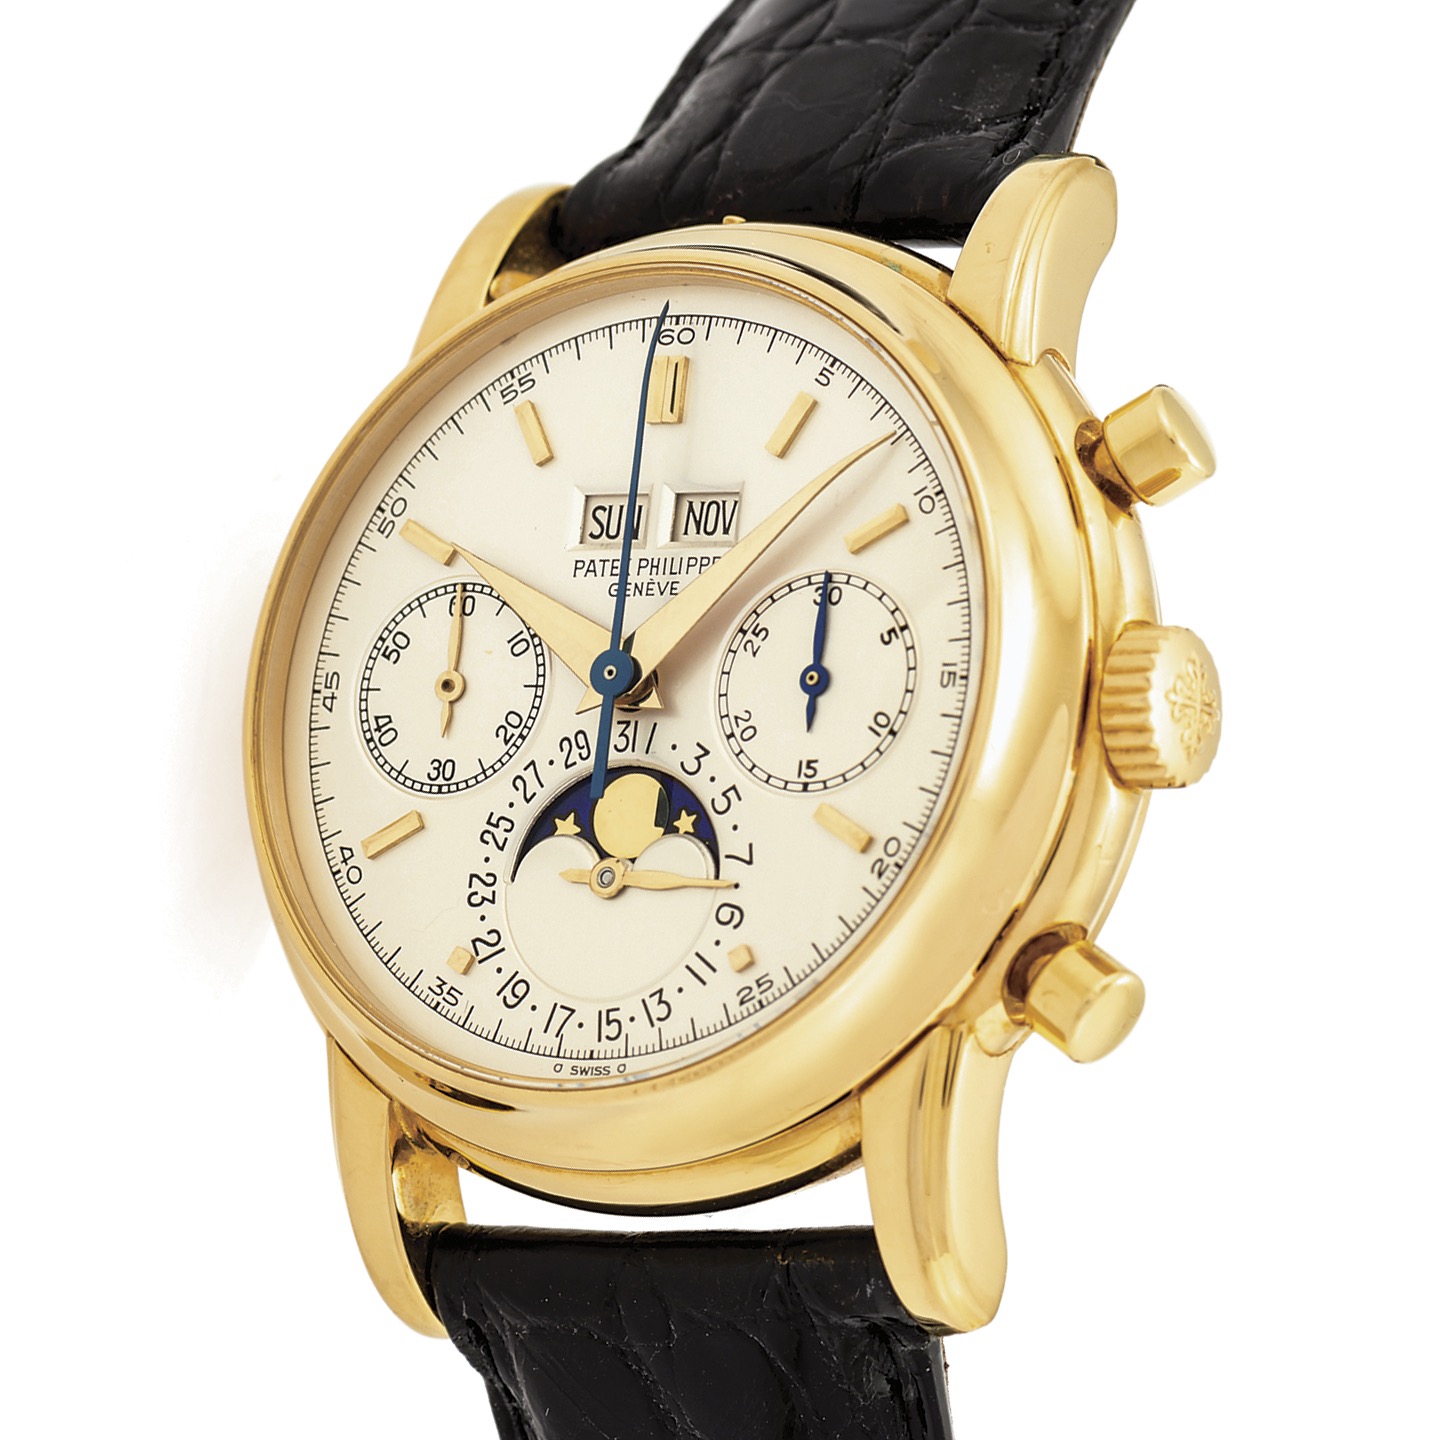 Patek Philippe Reference 2499/100P | FintechZoom